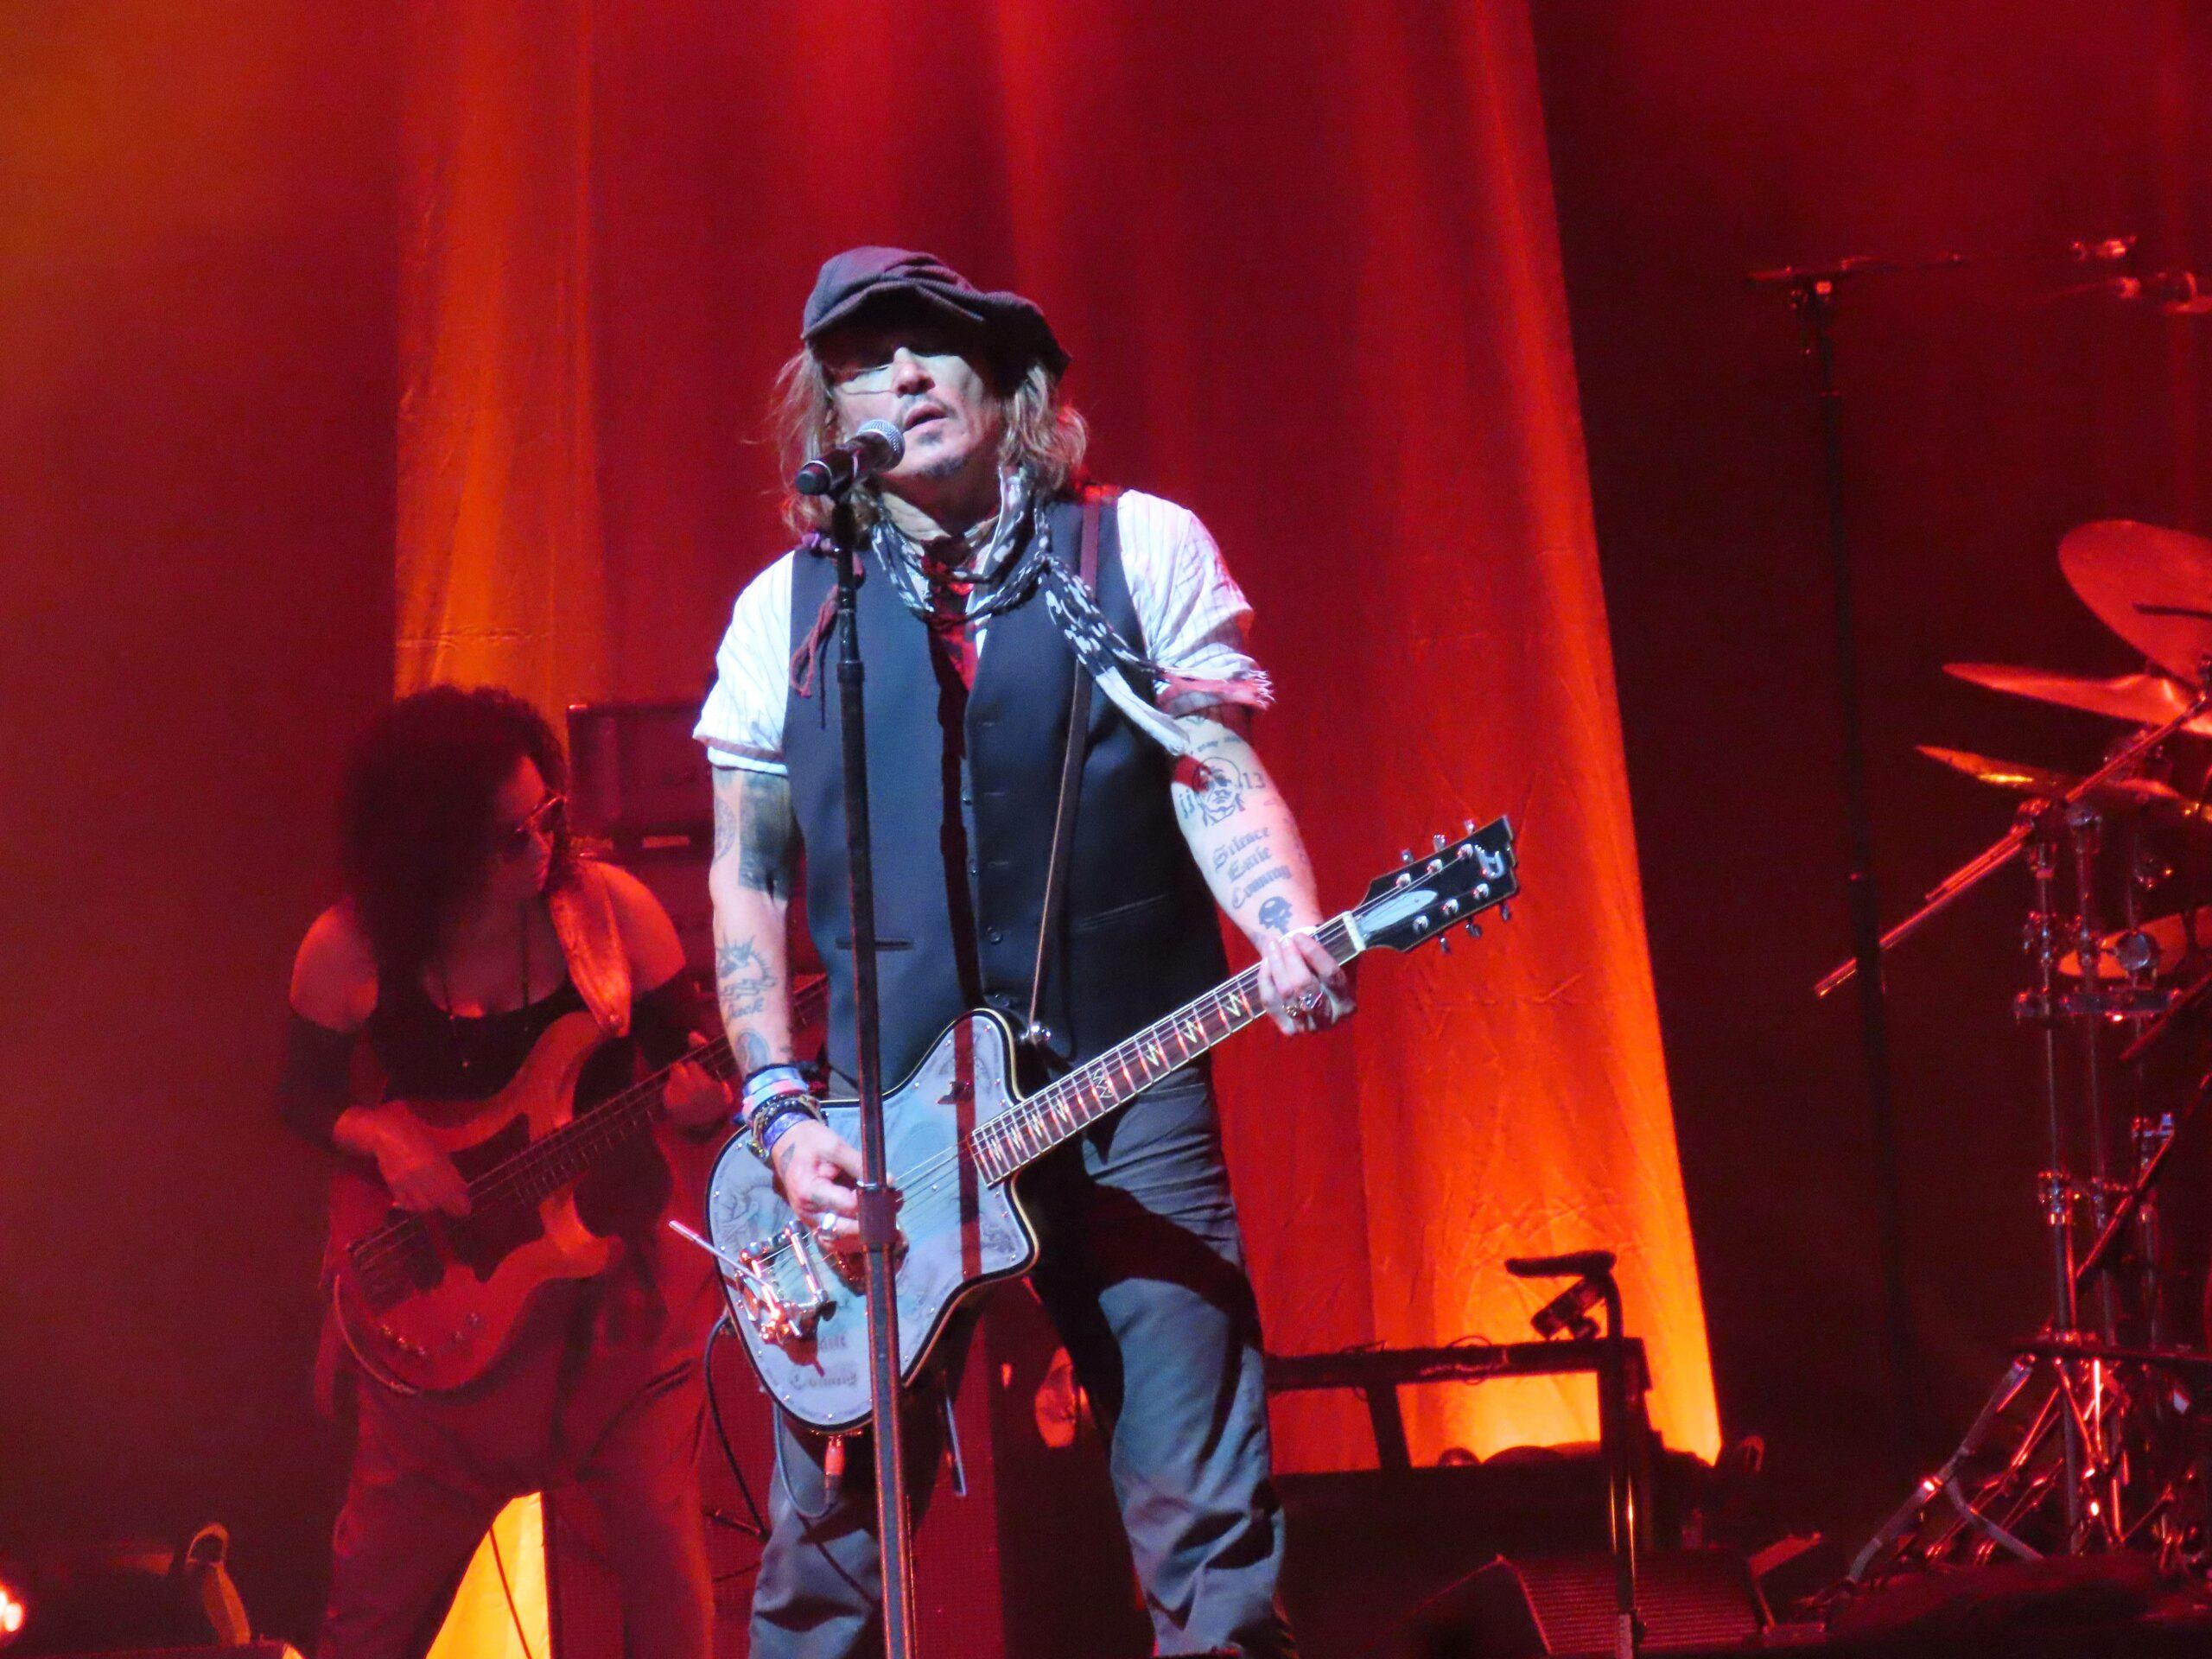 Johnny Depp playing live with Jeff Beck in Paris